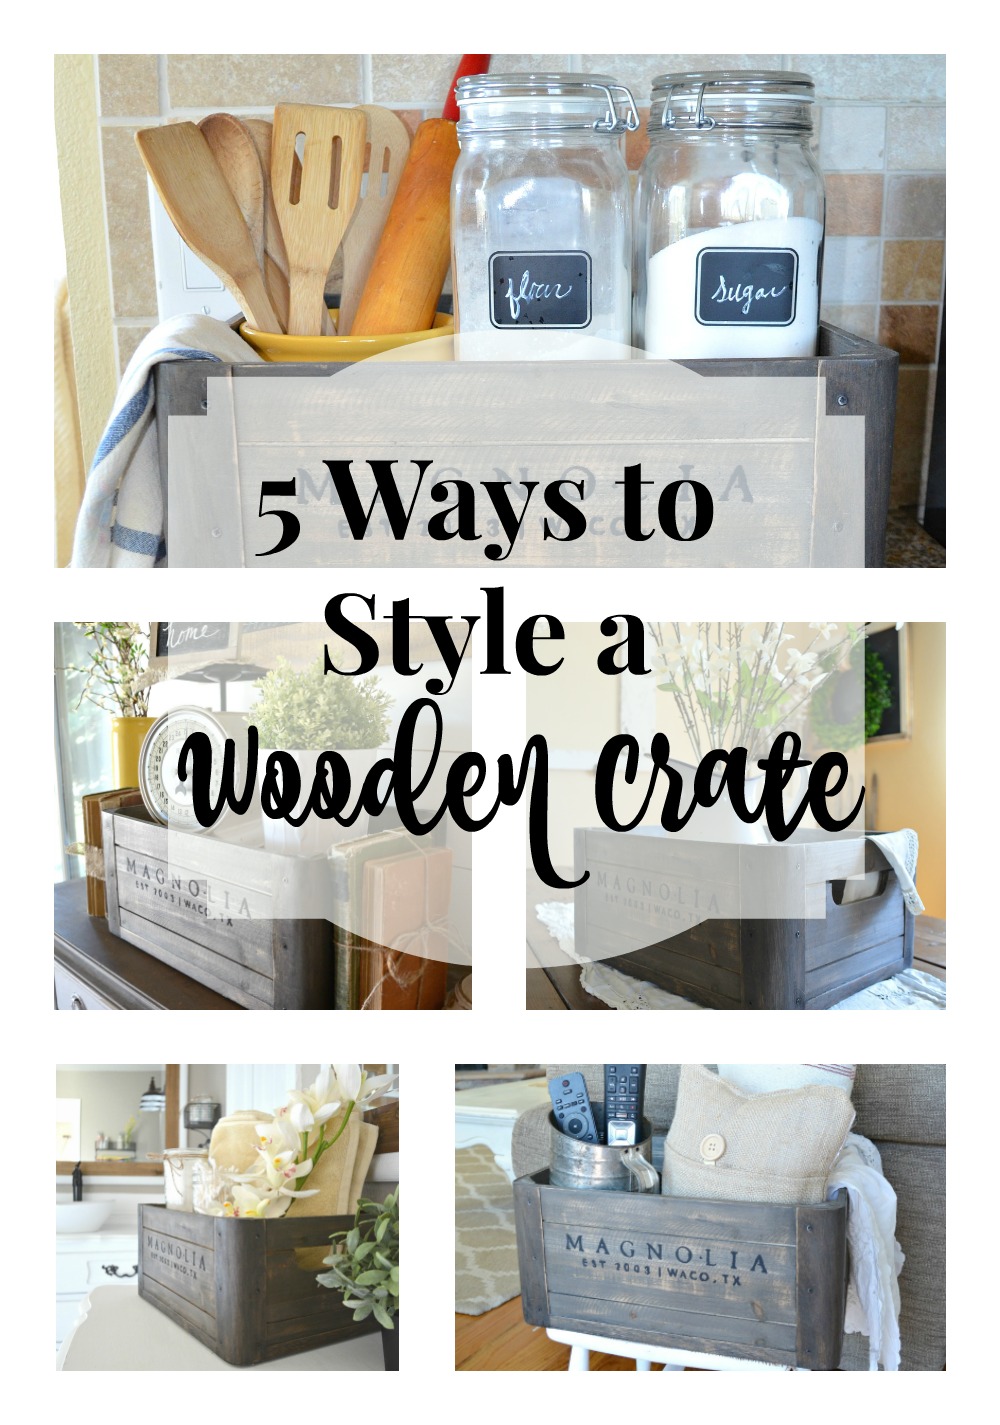 5 Ways to Style a Wooden Crate